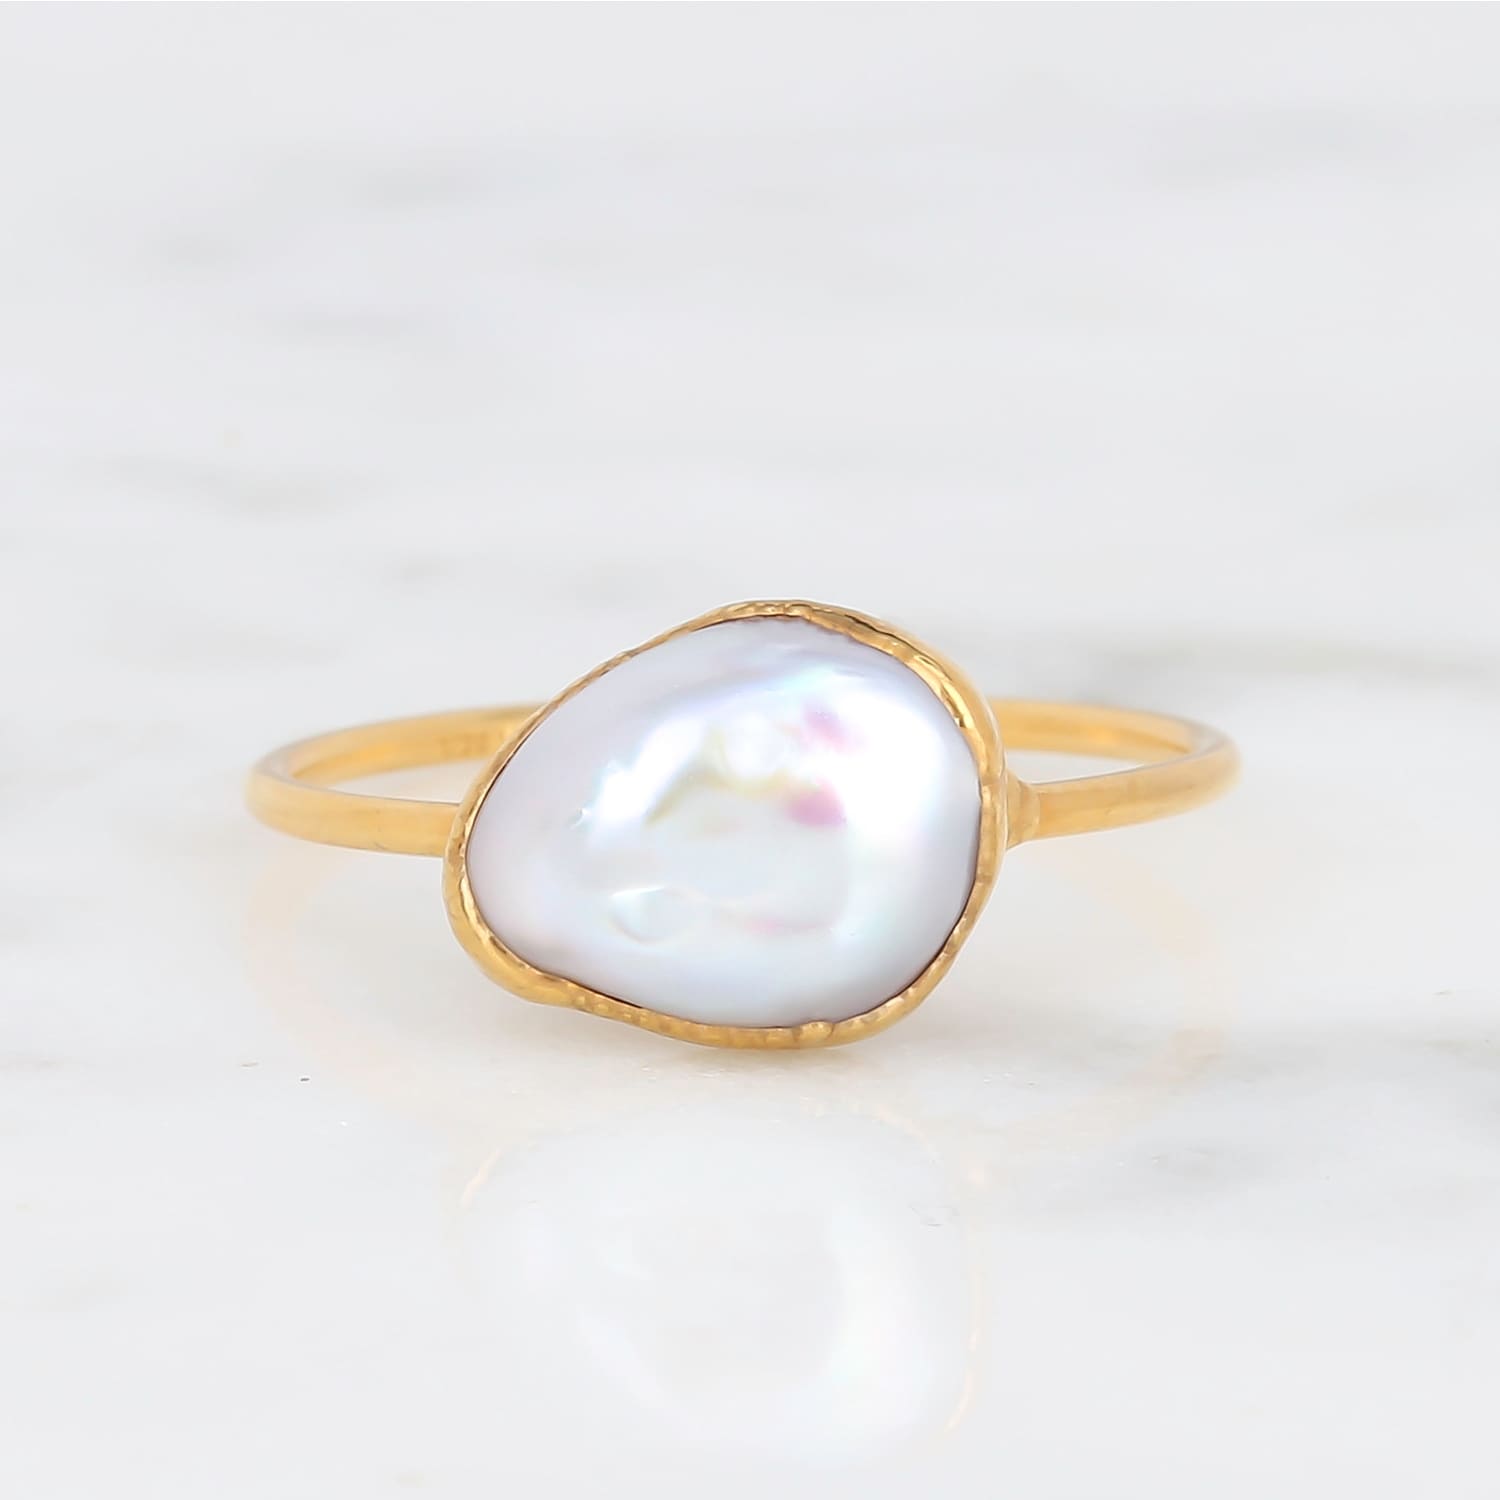 Large Raw Pearl Ring Gemstone Jewelry Rough Crystal Stone